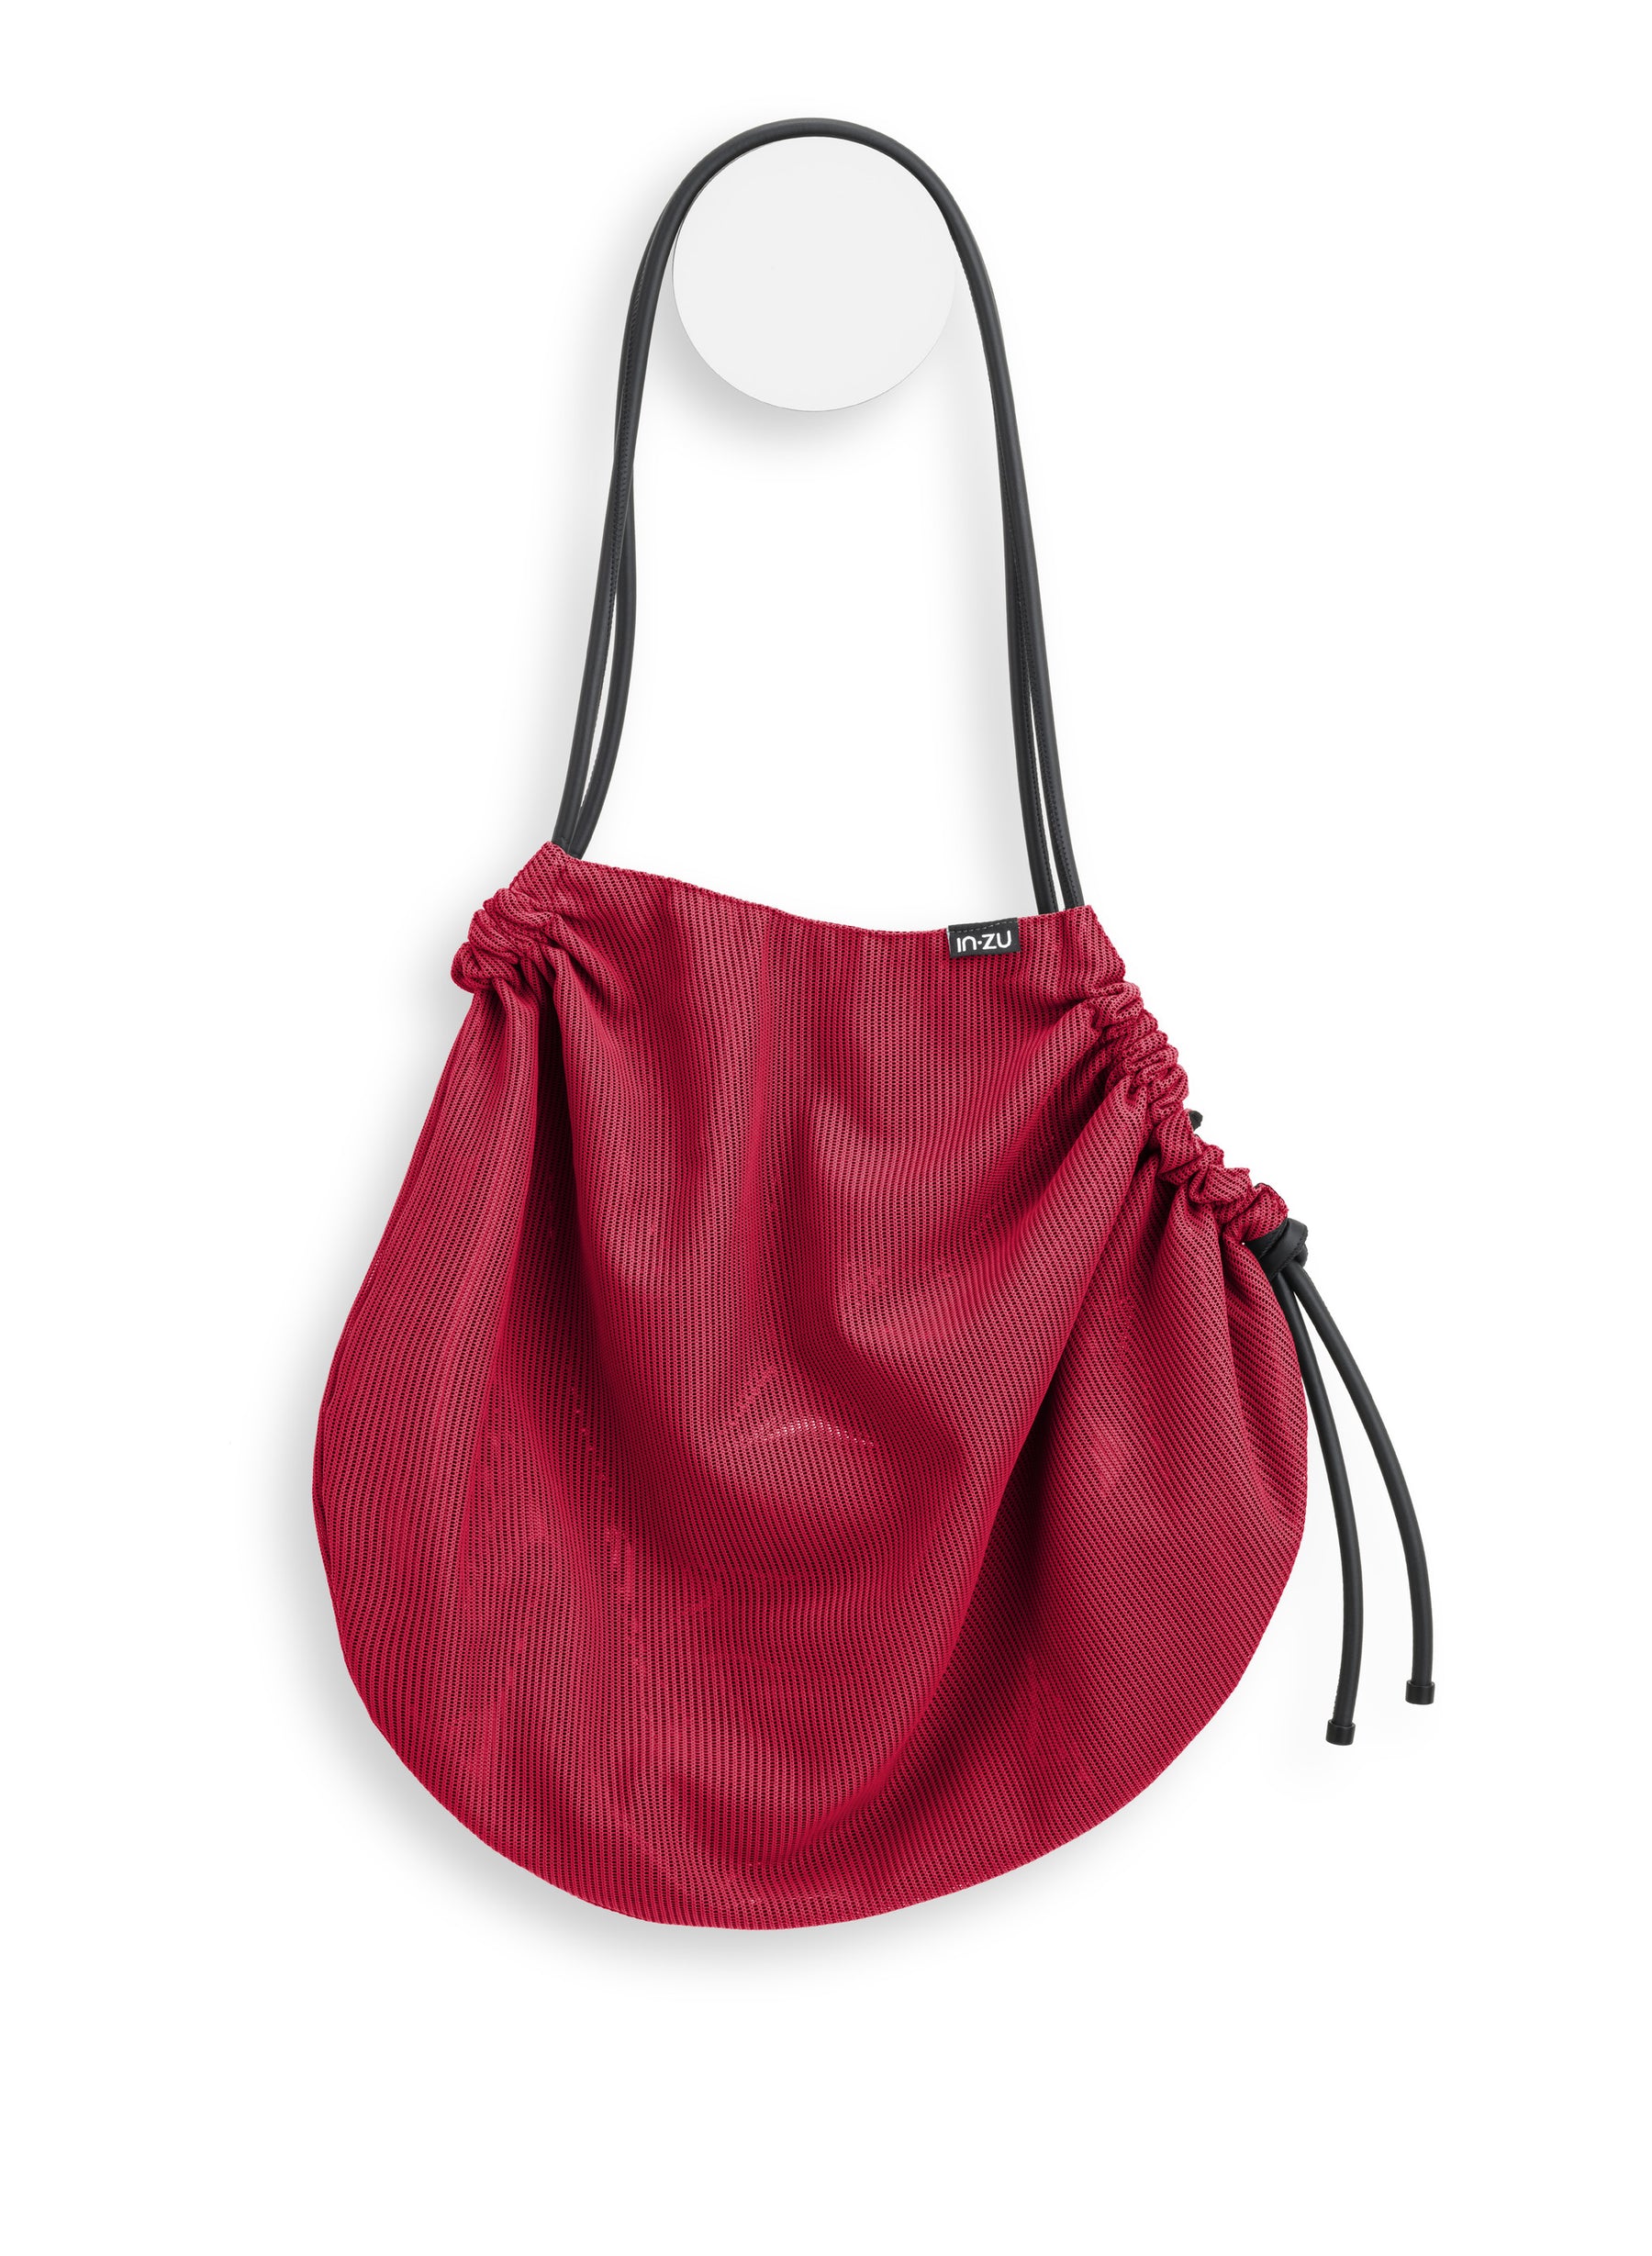 COCCO' NEO' BAG (RED OVER FILM)                                                 B-ROF